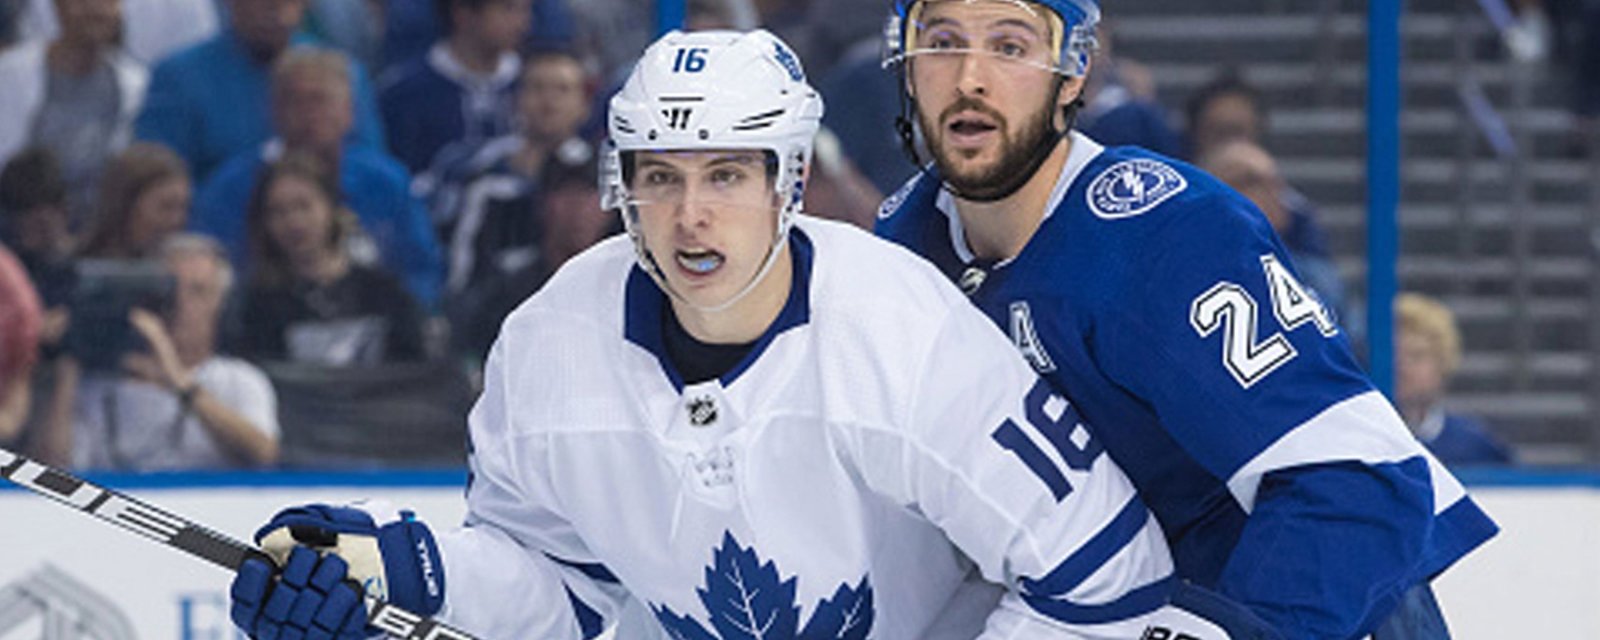 Leafs booed off home ice after brutal performance against Lightning